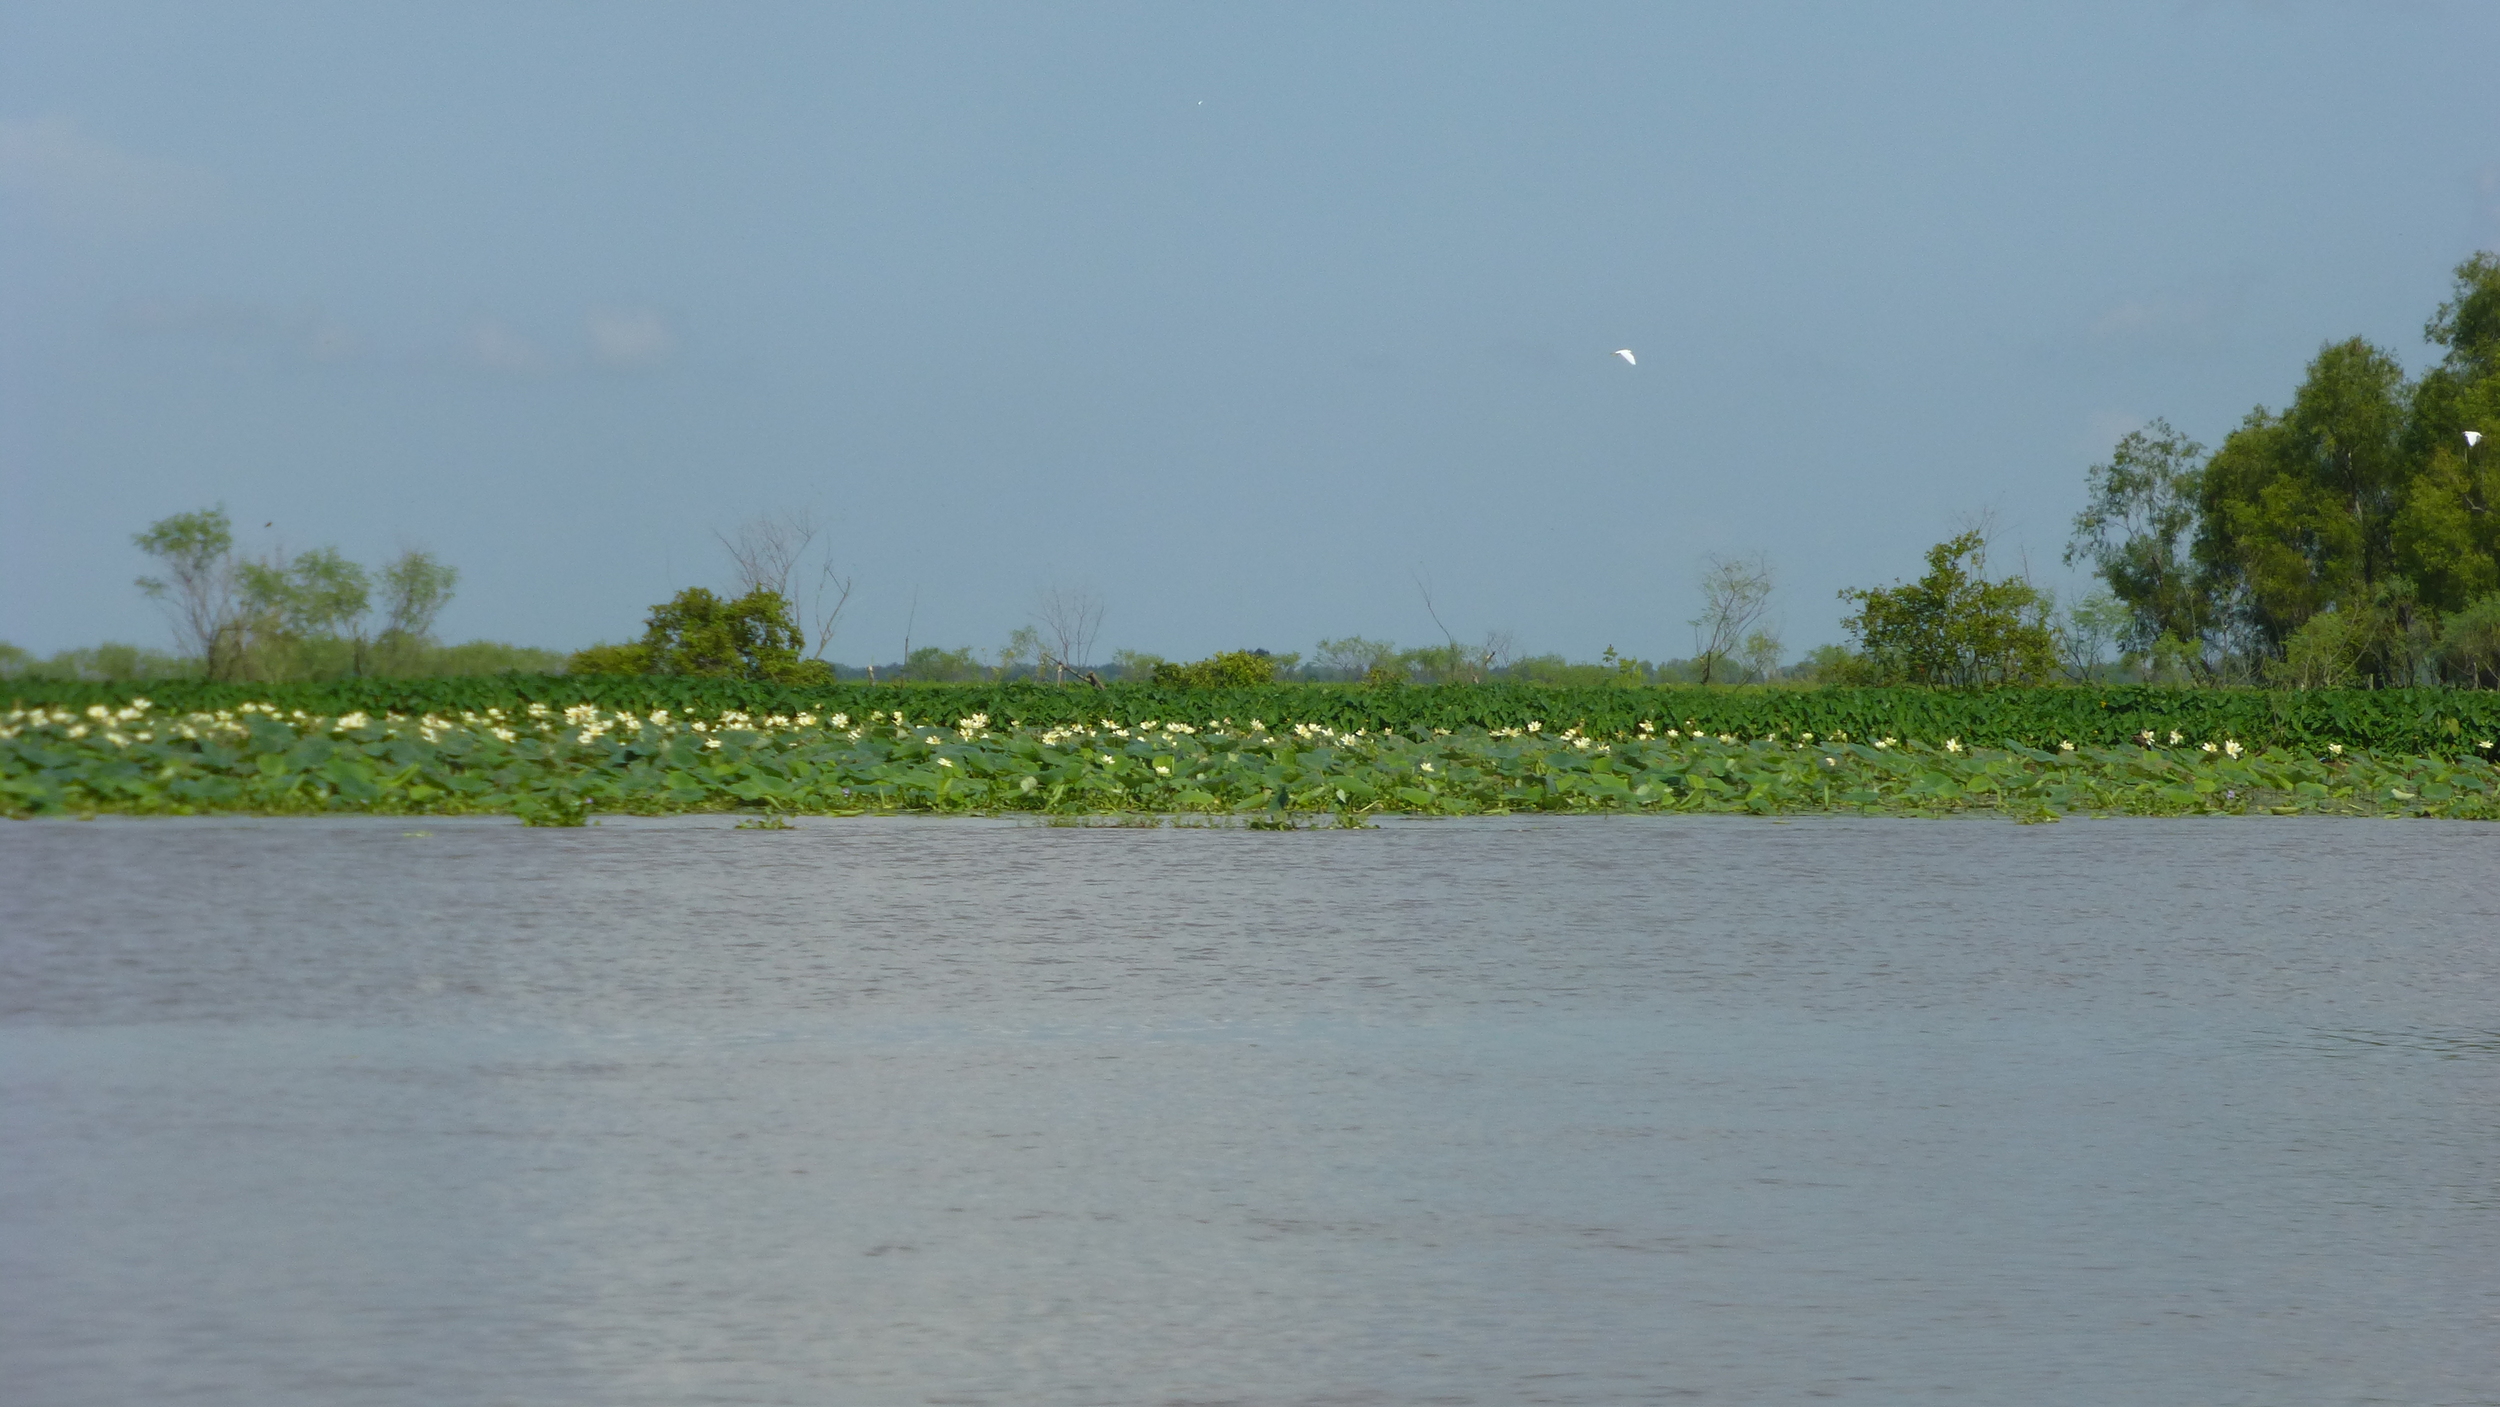 Lotuses blooming on Mike Island, part of Wax Lake Delta.